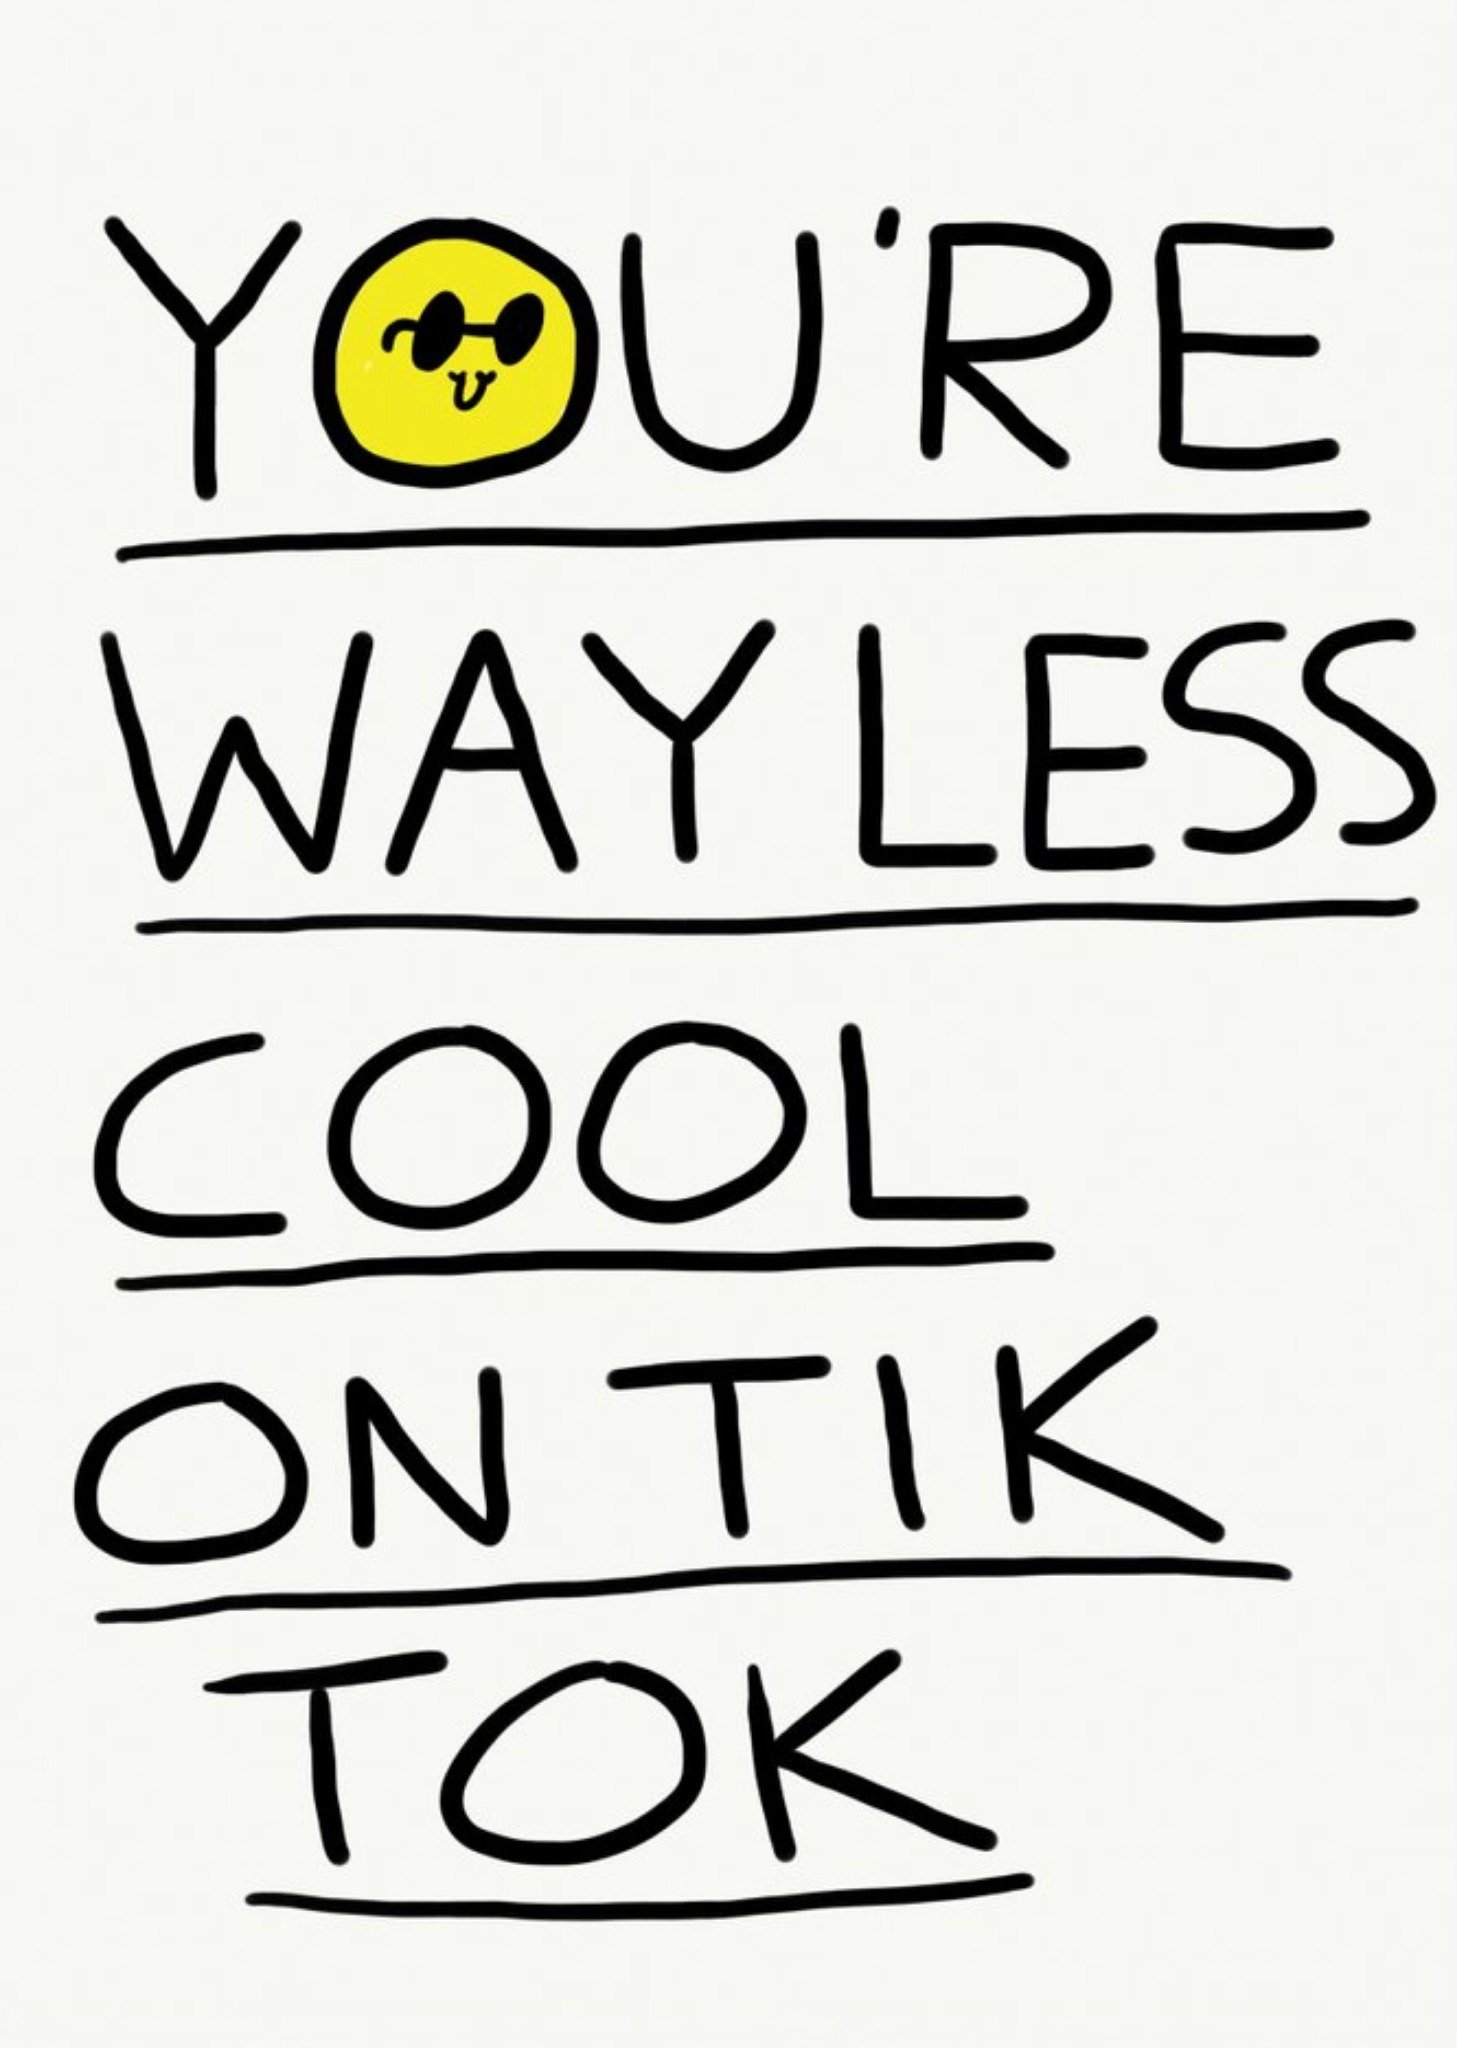 Jolly Awesome You're Way Less Cool On Ticktock Card, Large